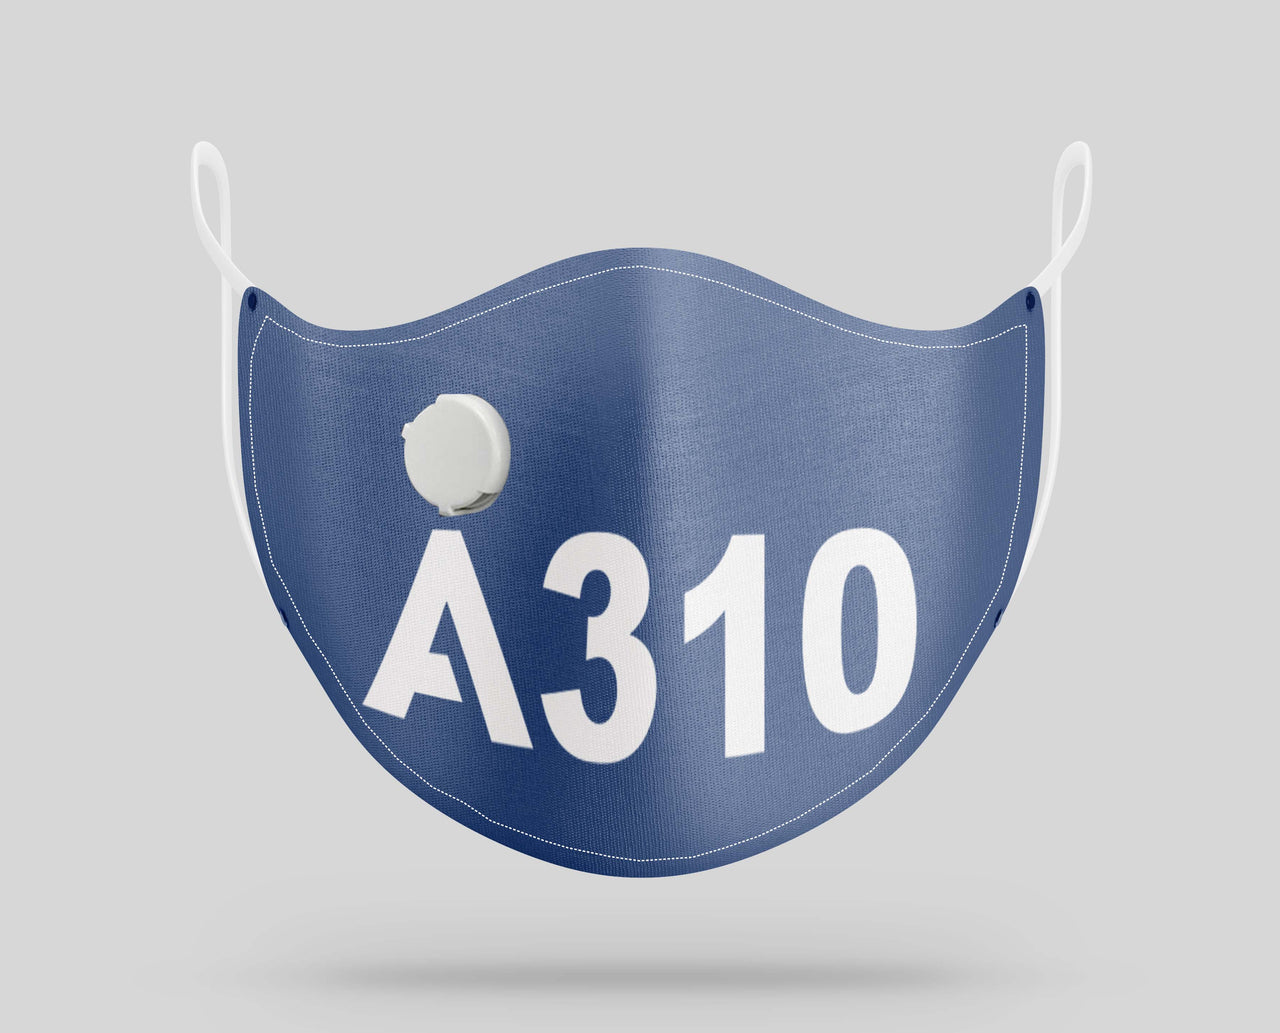 Airbus A310 Text Designed Face Masks